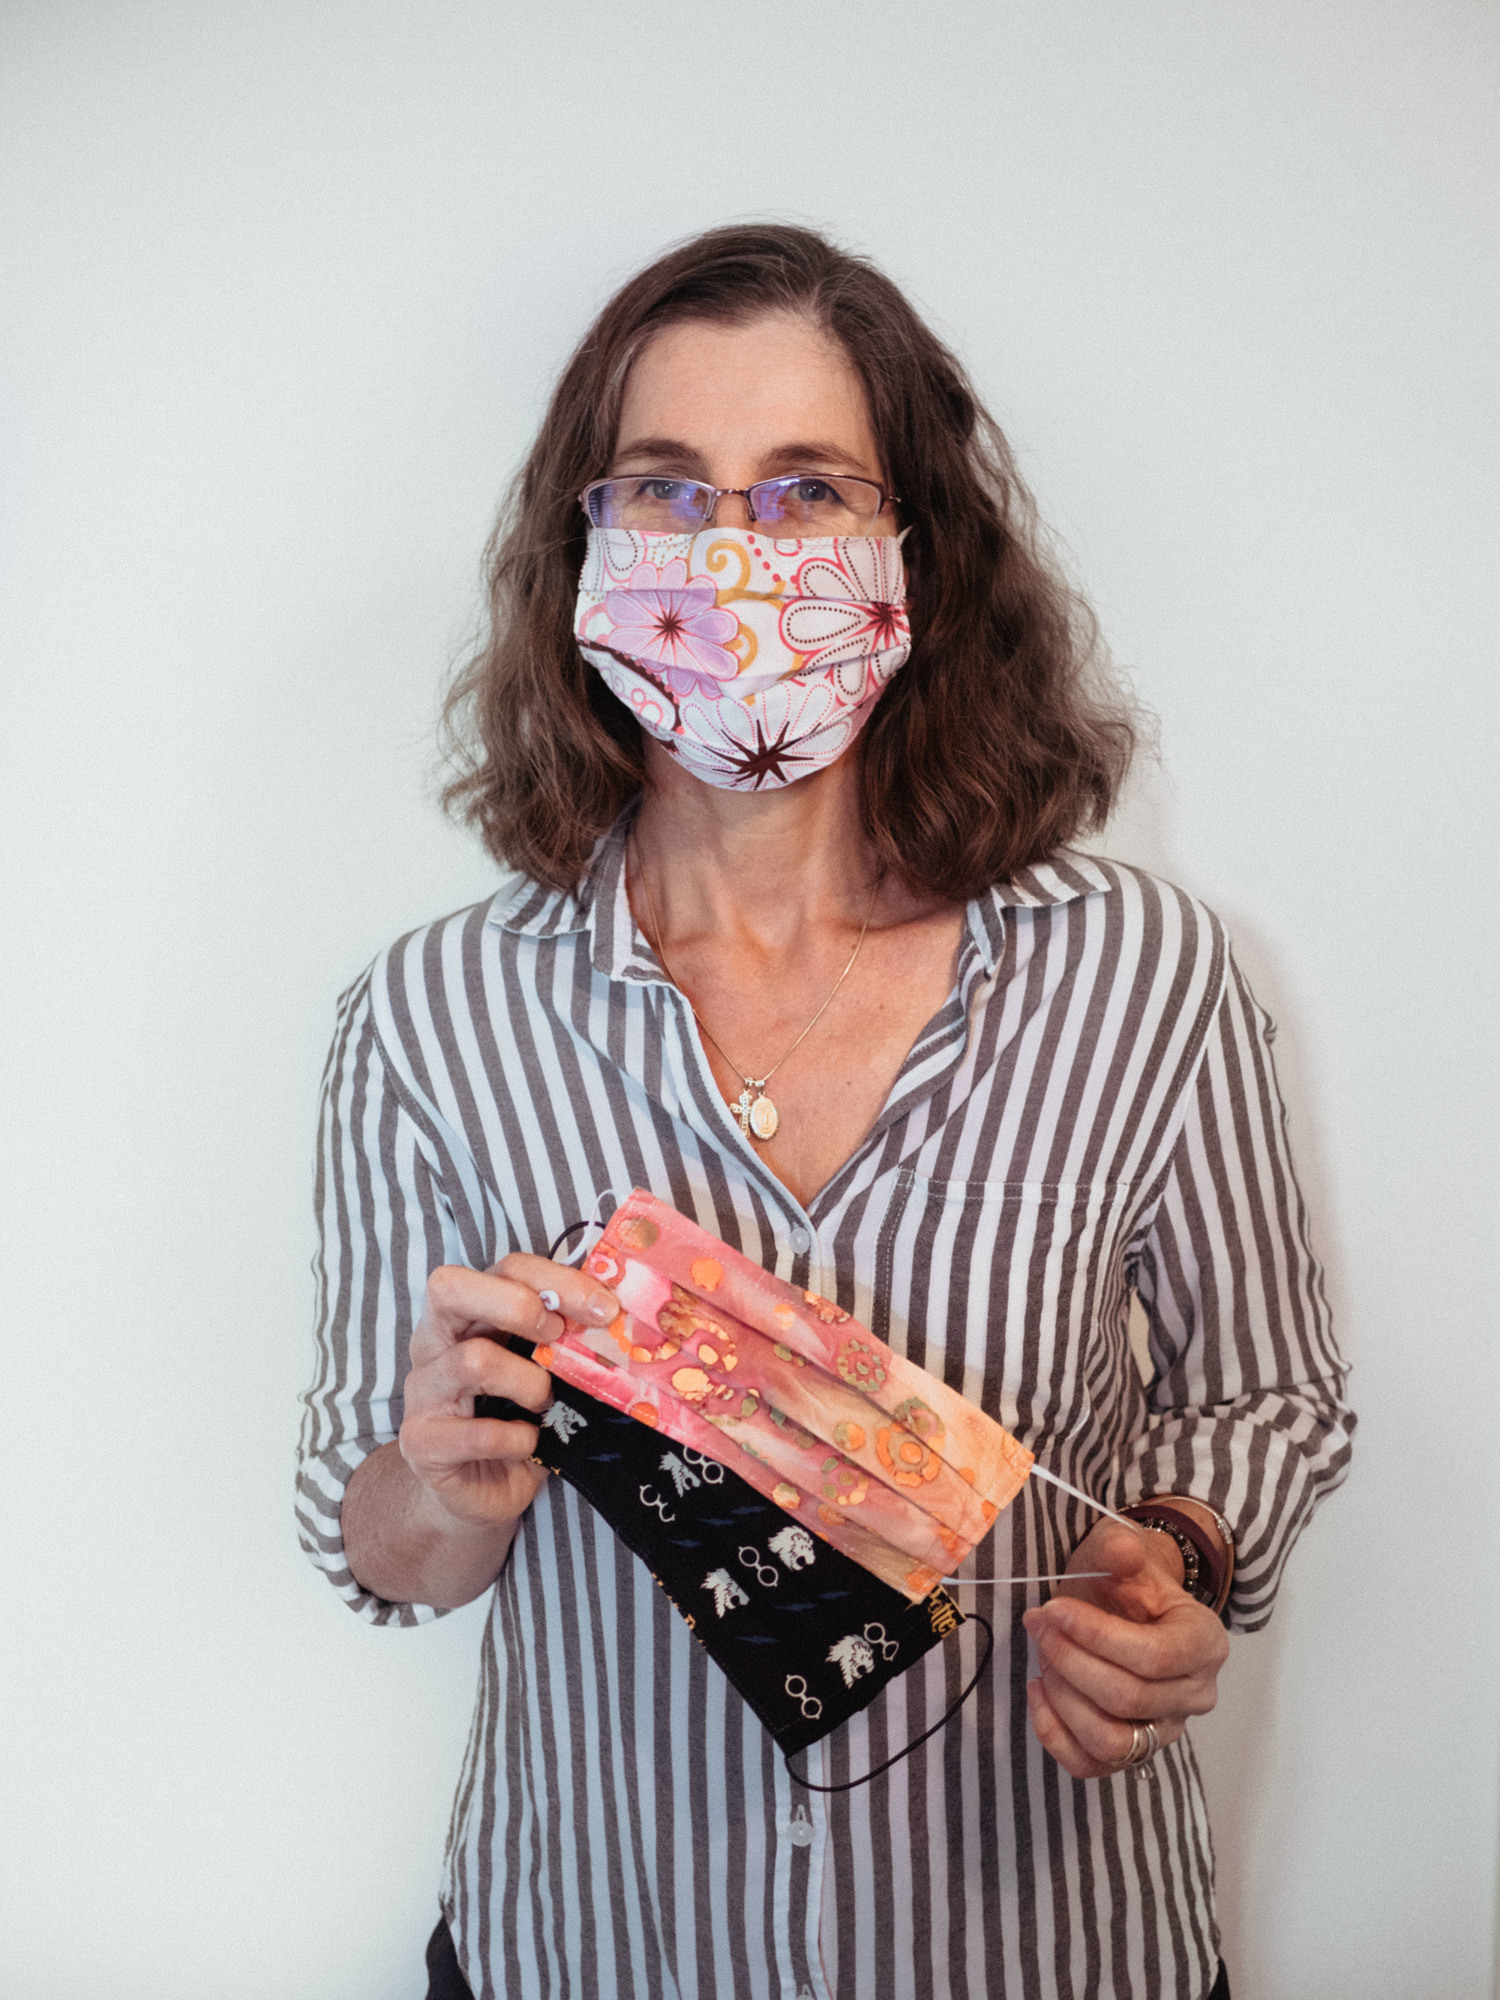 Dr. Ester Lincourt is using her sewing skills to create fabric face masks. Photo courtesy of Lincourt.